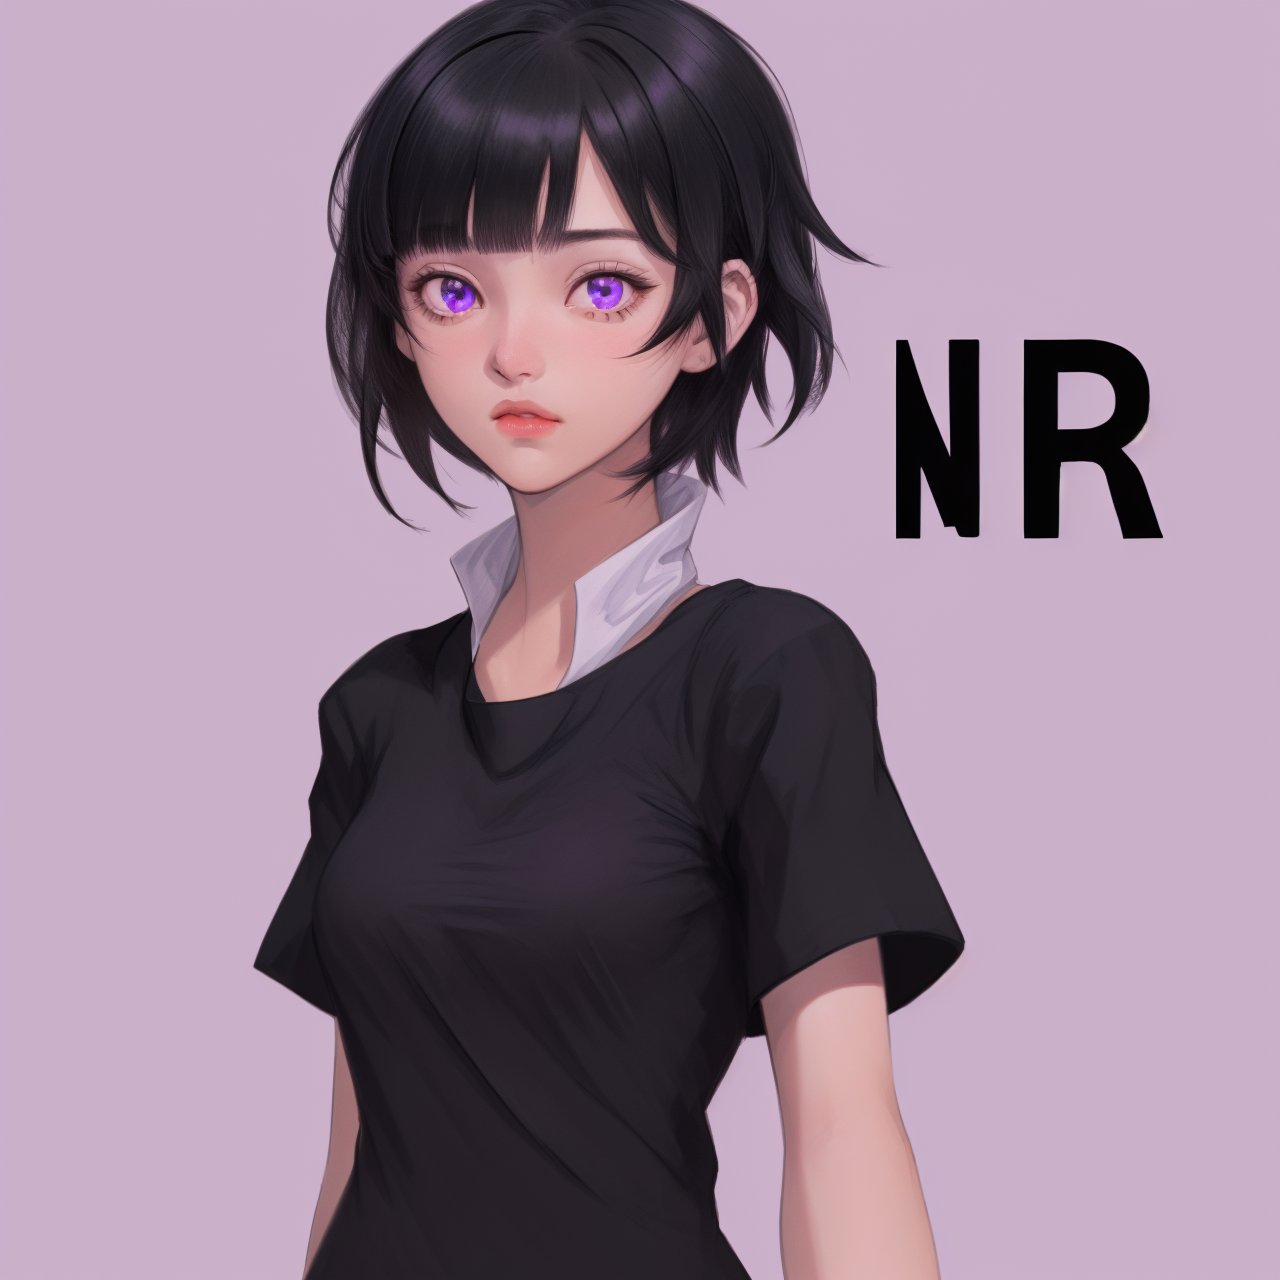 i need a female character with black short bangs hair which looks like this. Her eyes are purple and she is short. 